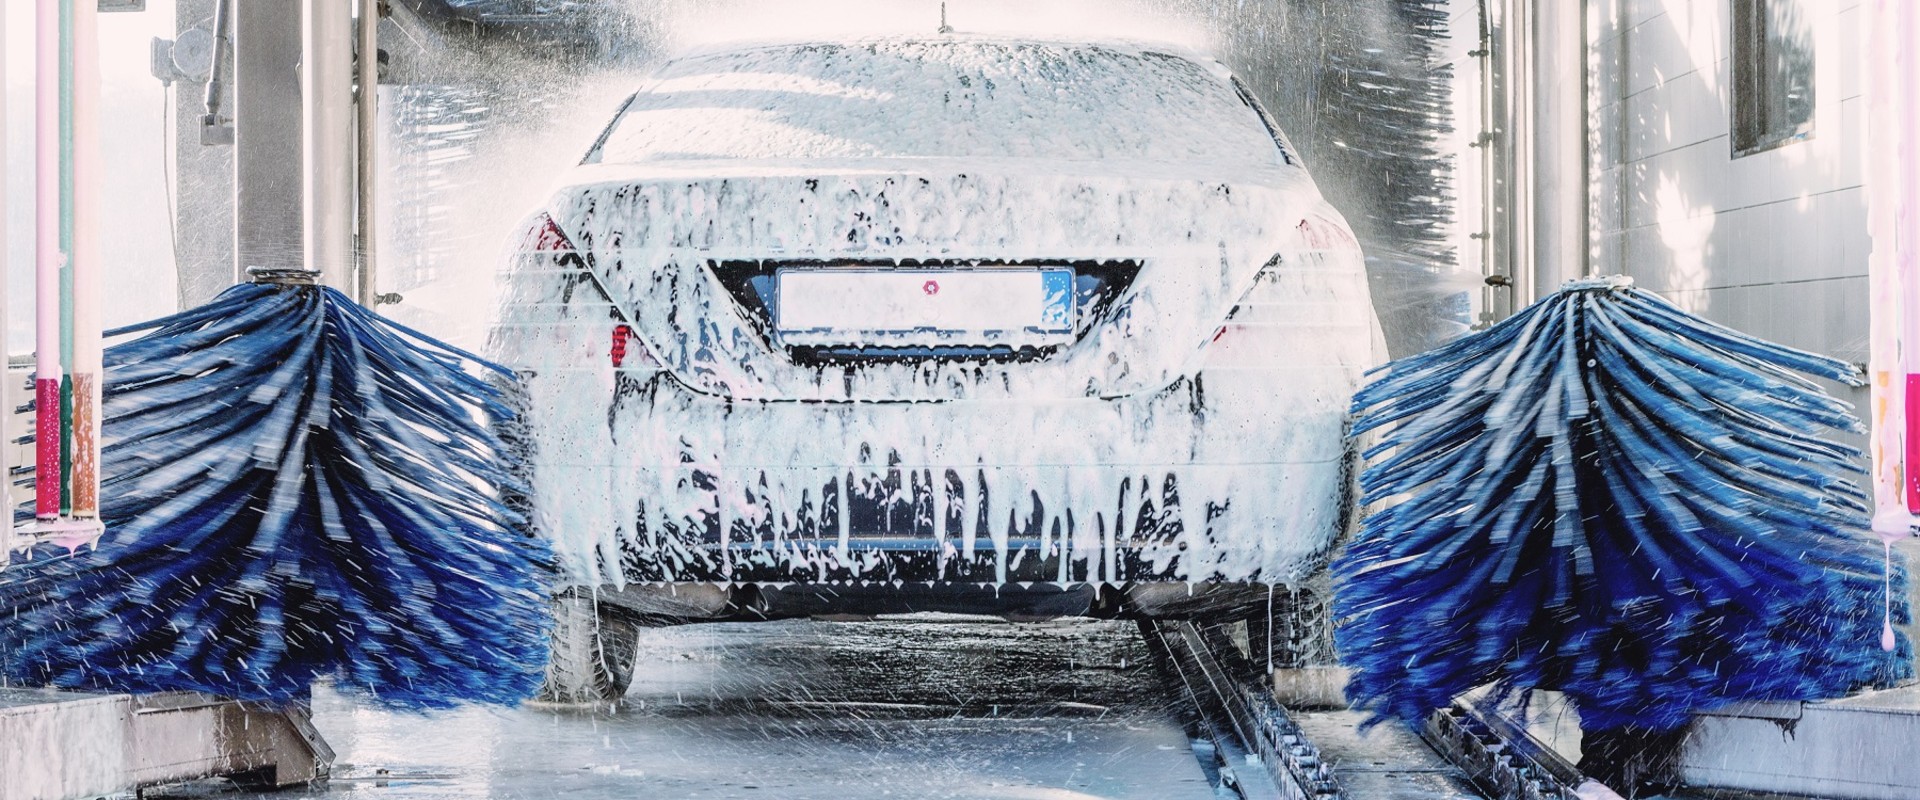 The Ultimate Guide to Scheduling a Car Wash Appointment in White Plains, NY